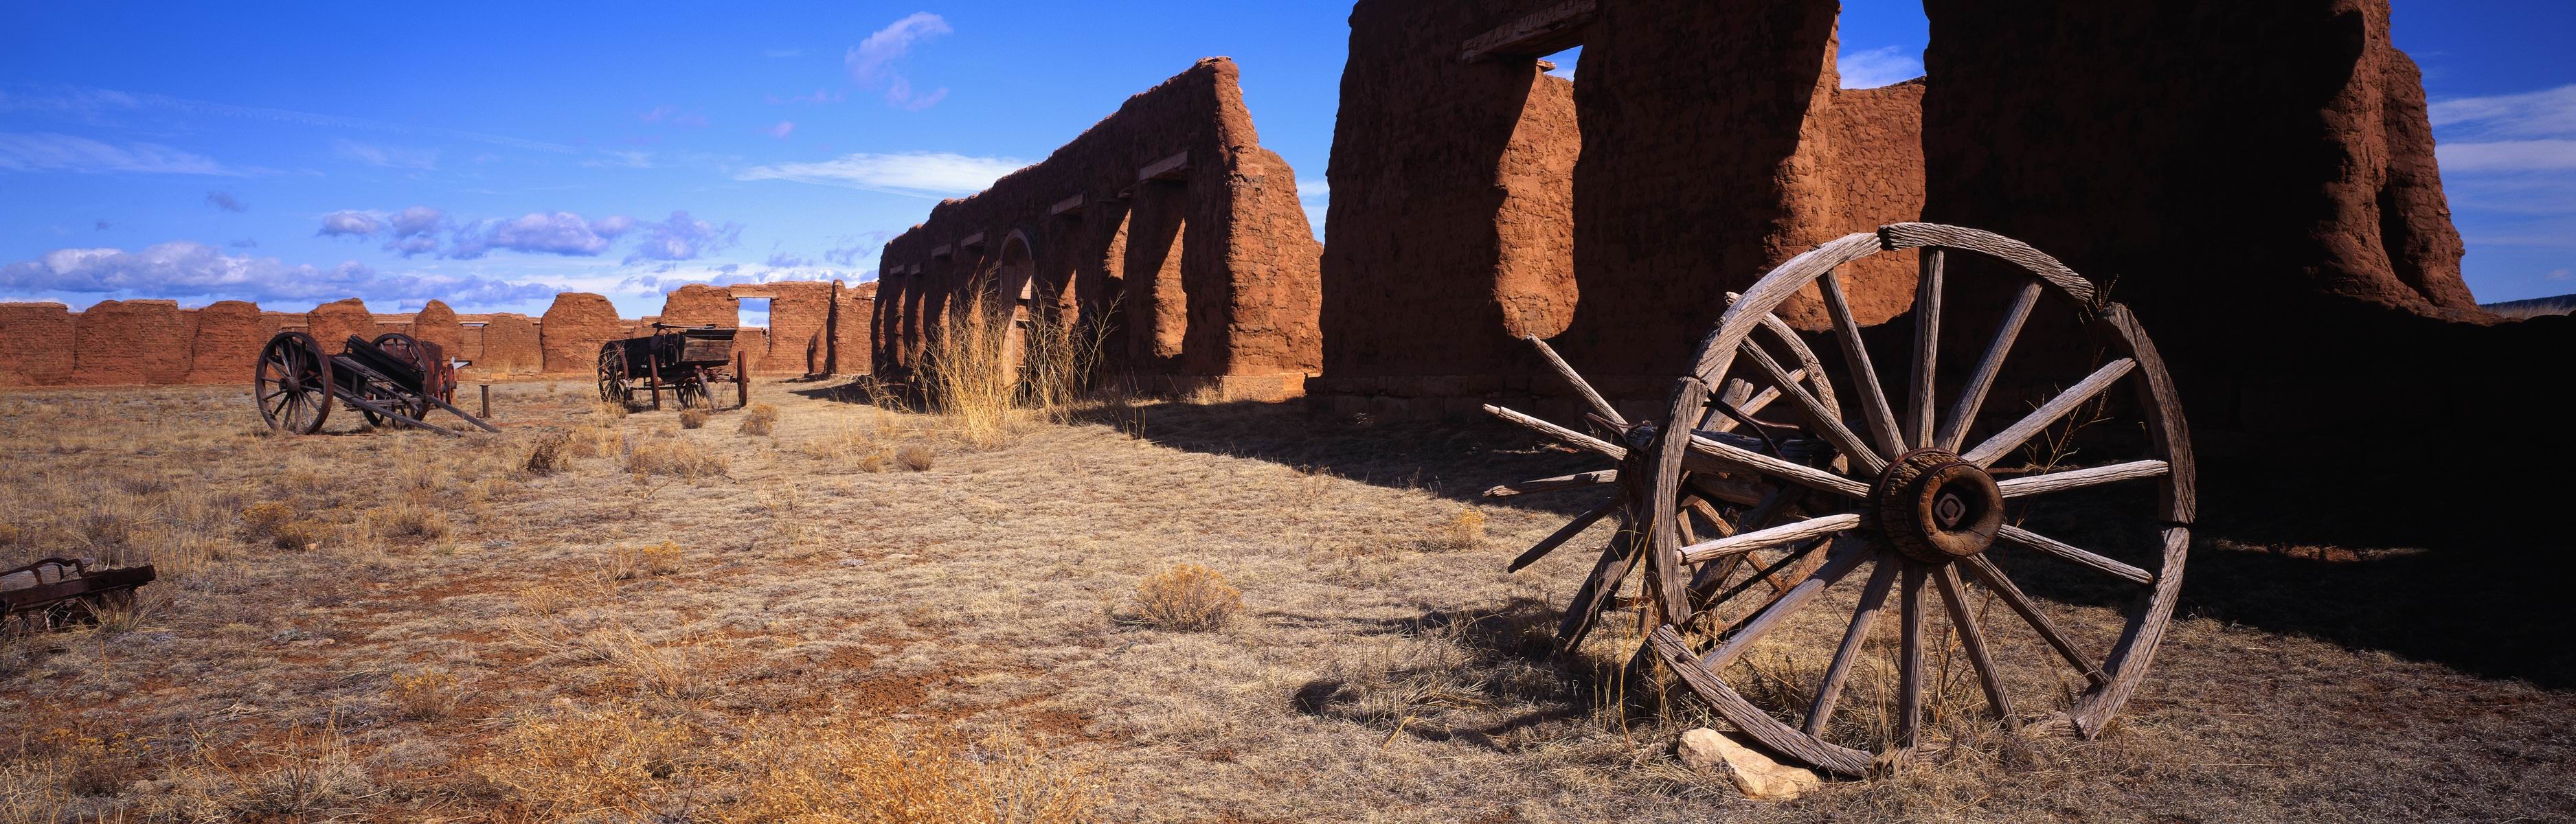 General 3750x1200 wheels ruins outdoors USA Ft. Union New Mexico